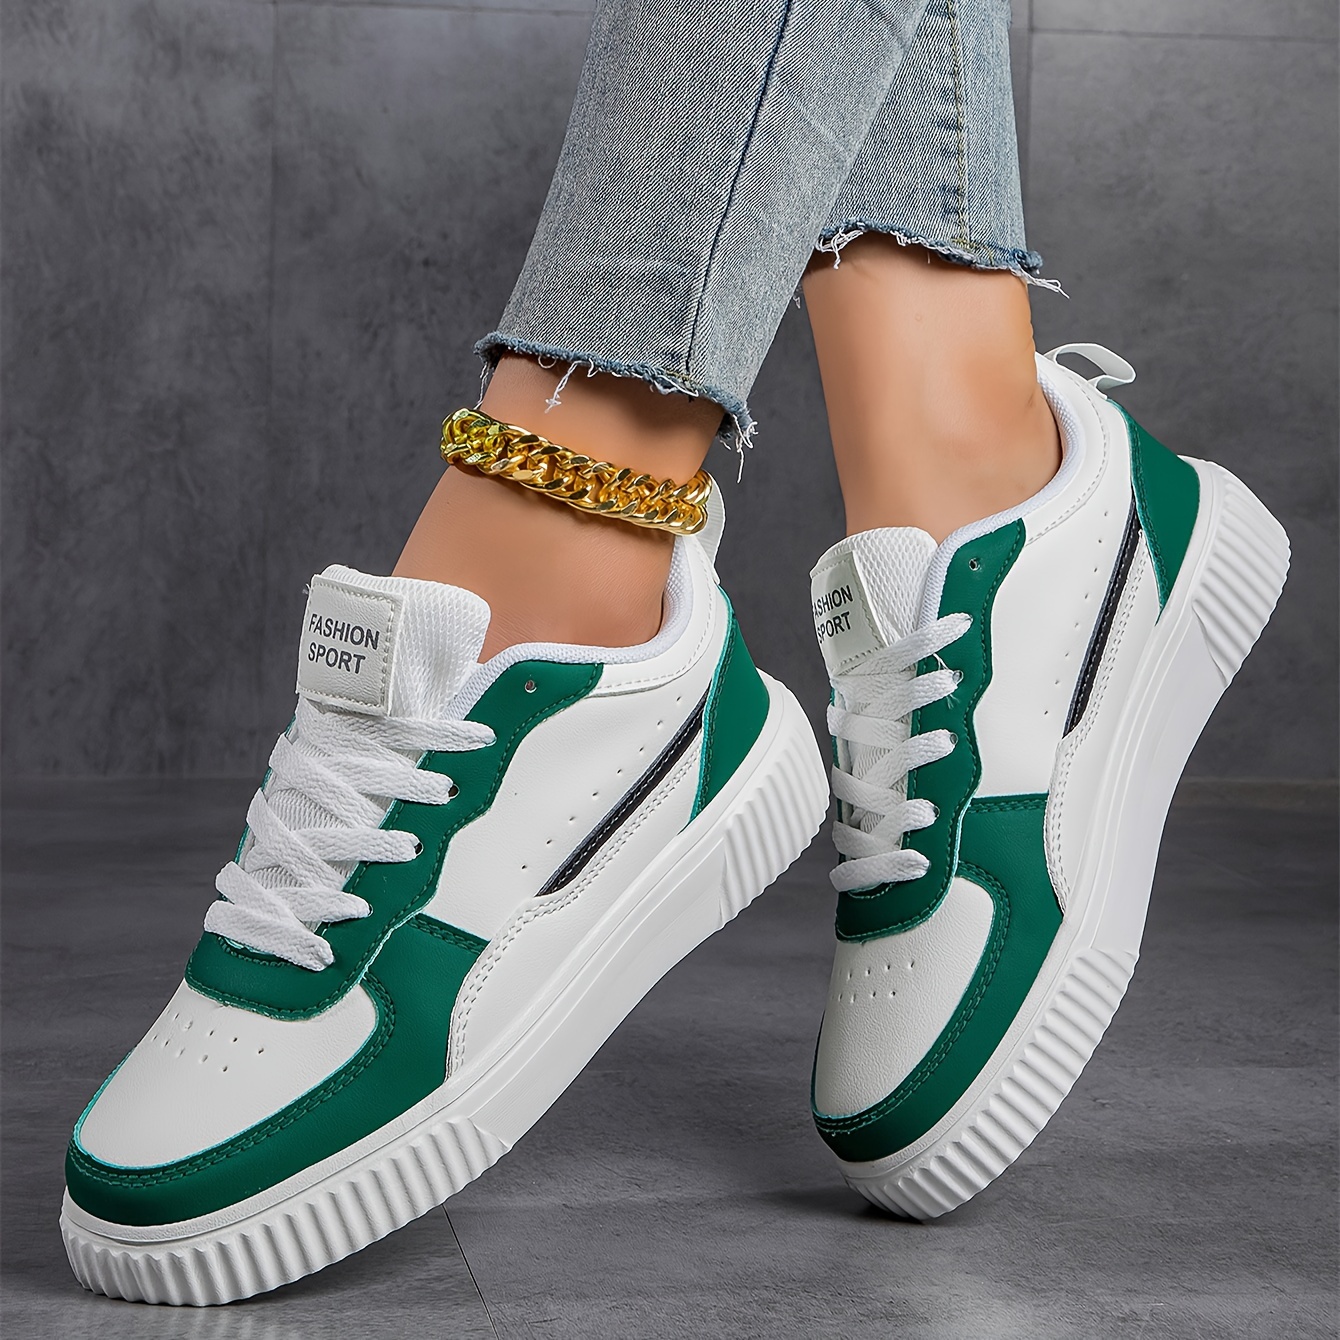 womens colorblock casual sneakers lace up comfy platform pastry skate shoes lightweight low top daily shoes details 1